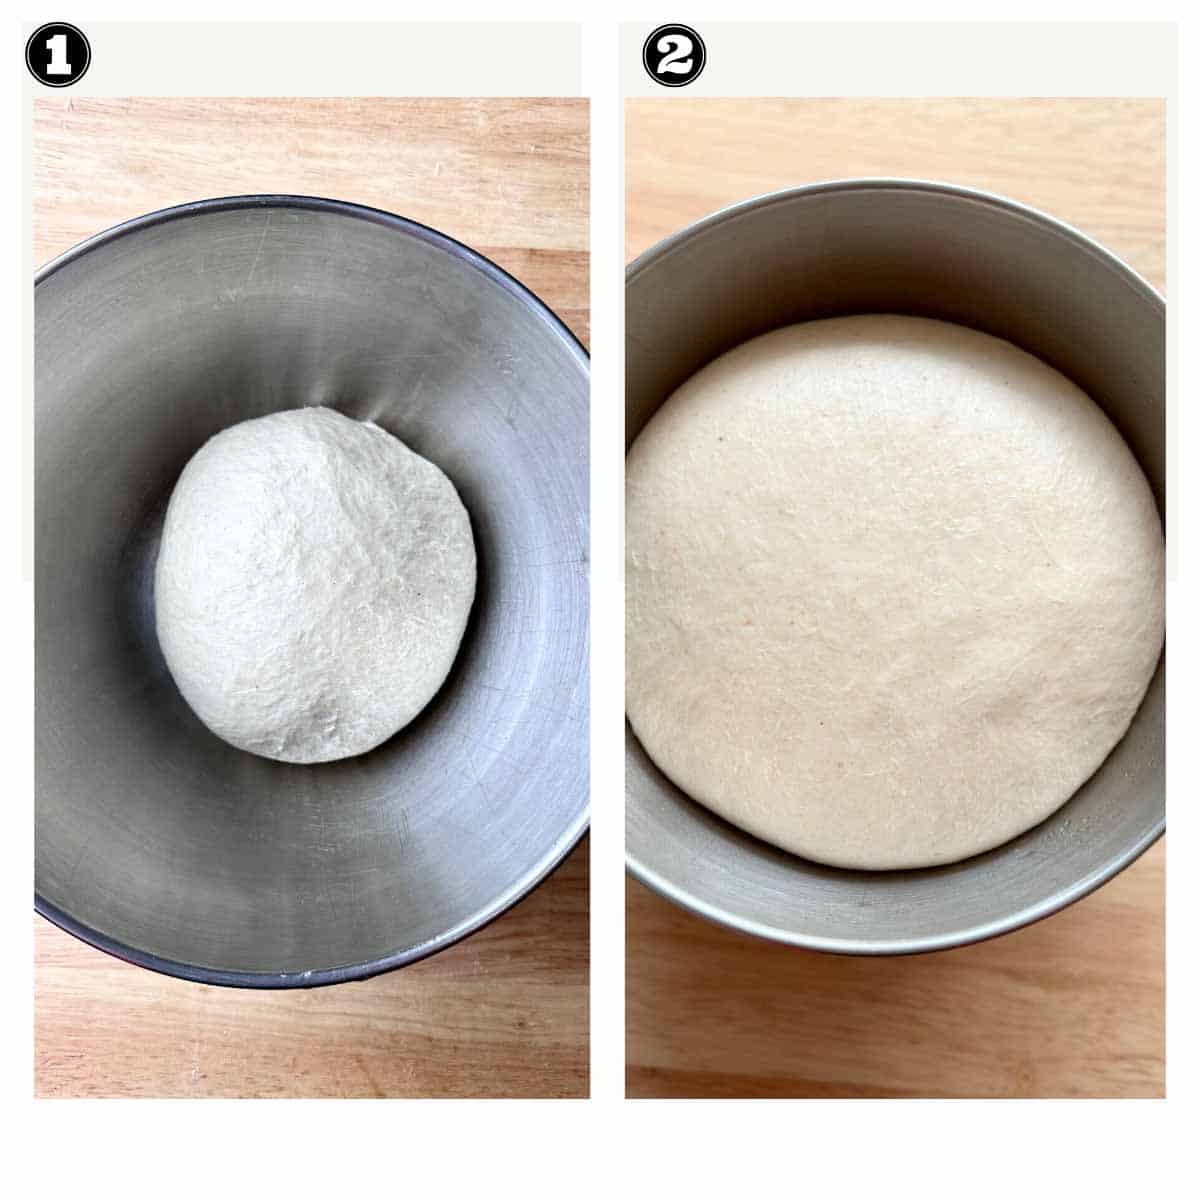 image showing stage of dough before and after bulk fermenting the dough